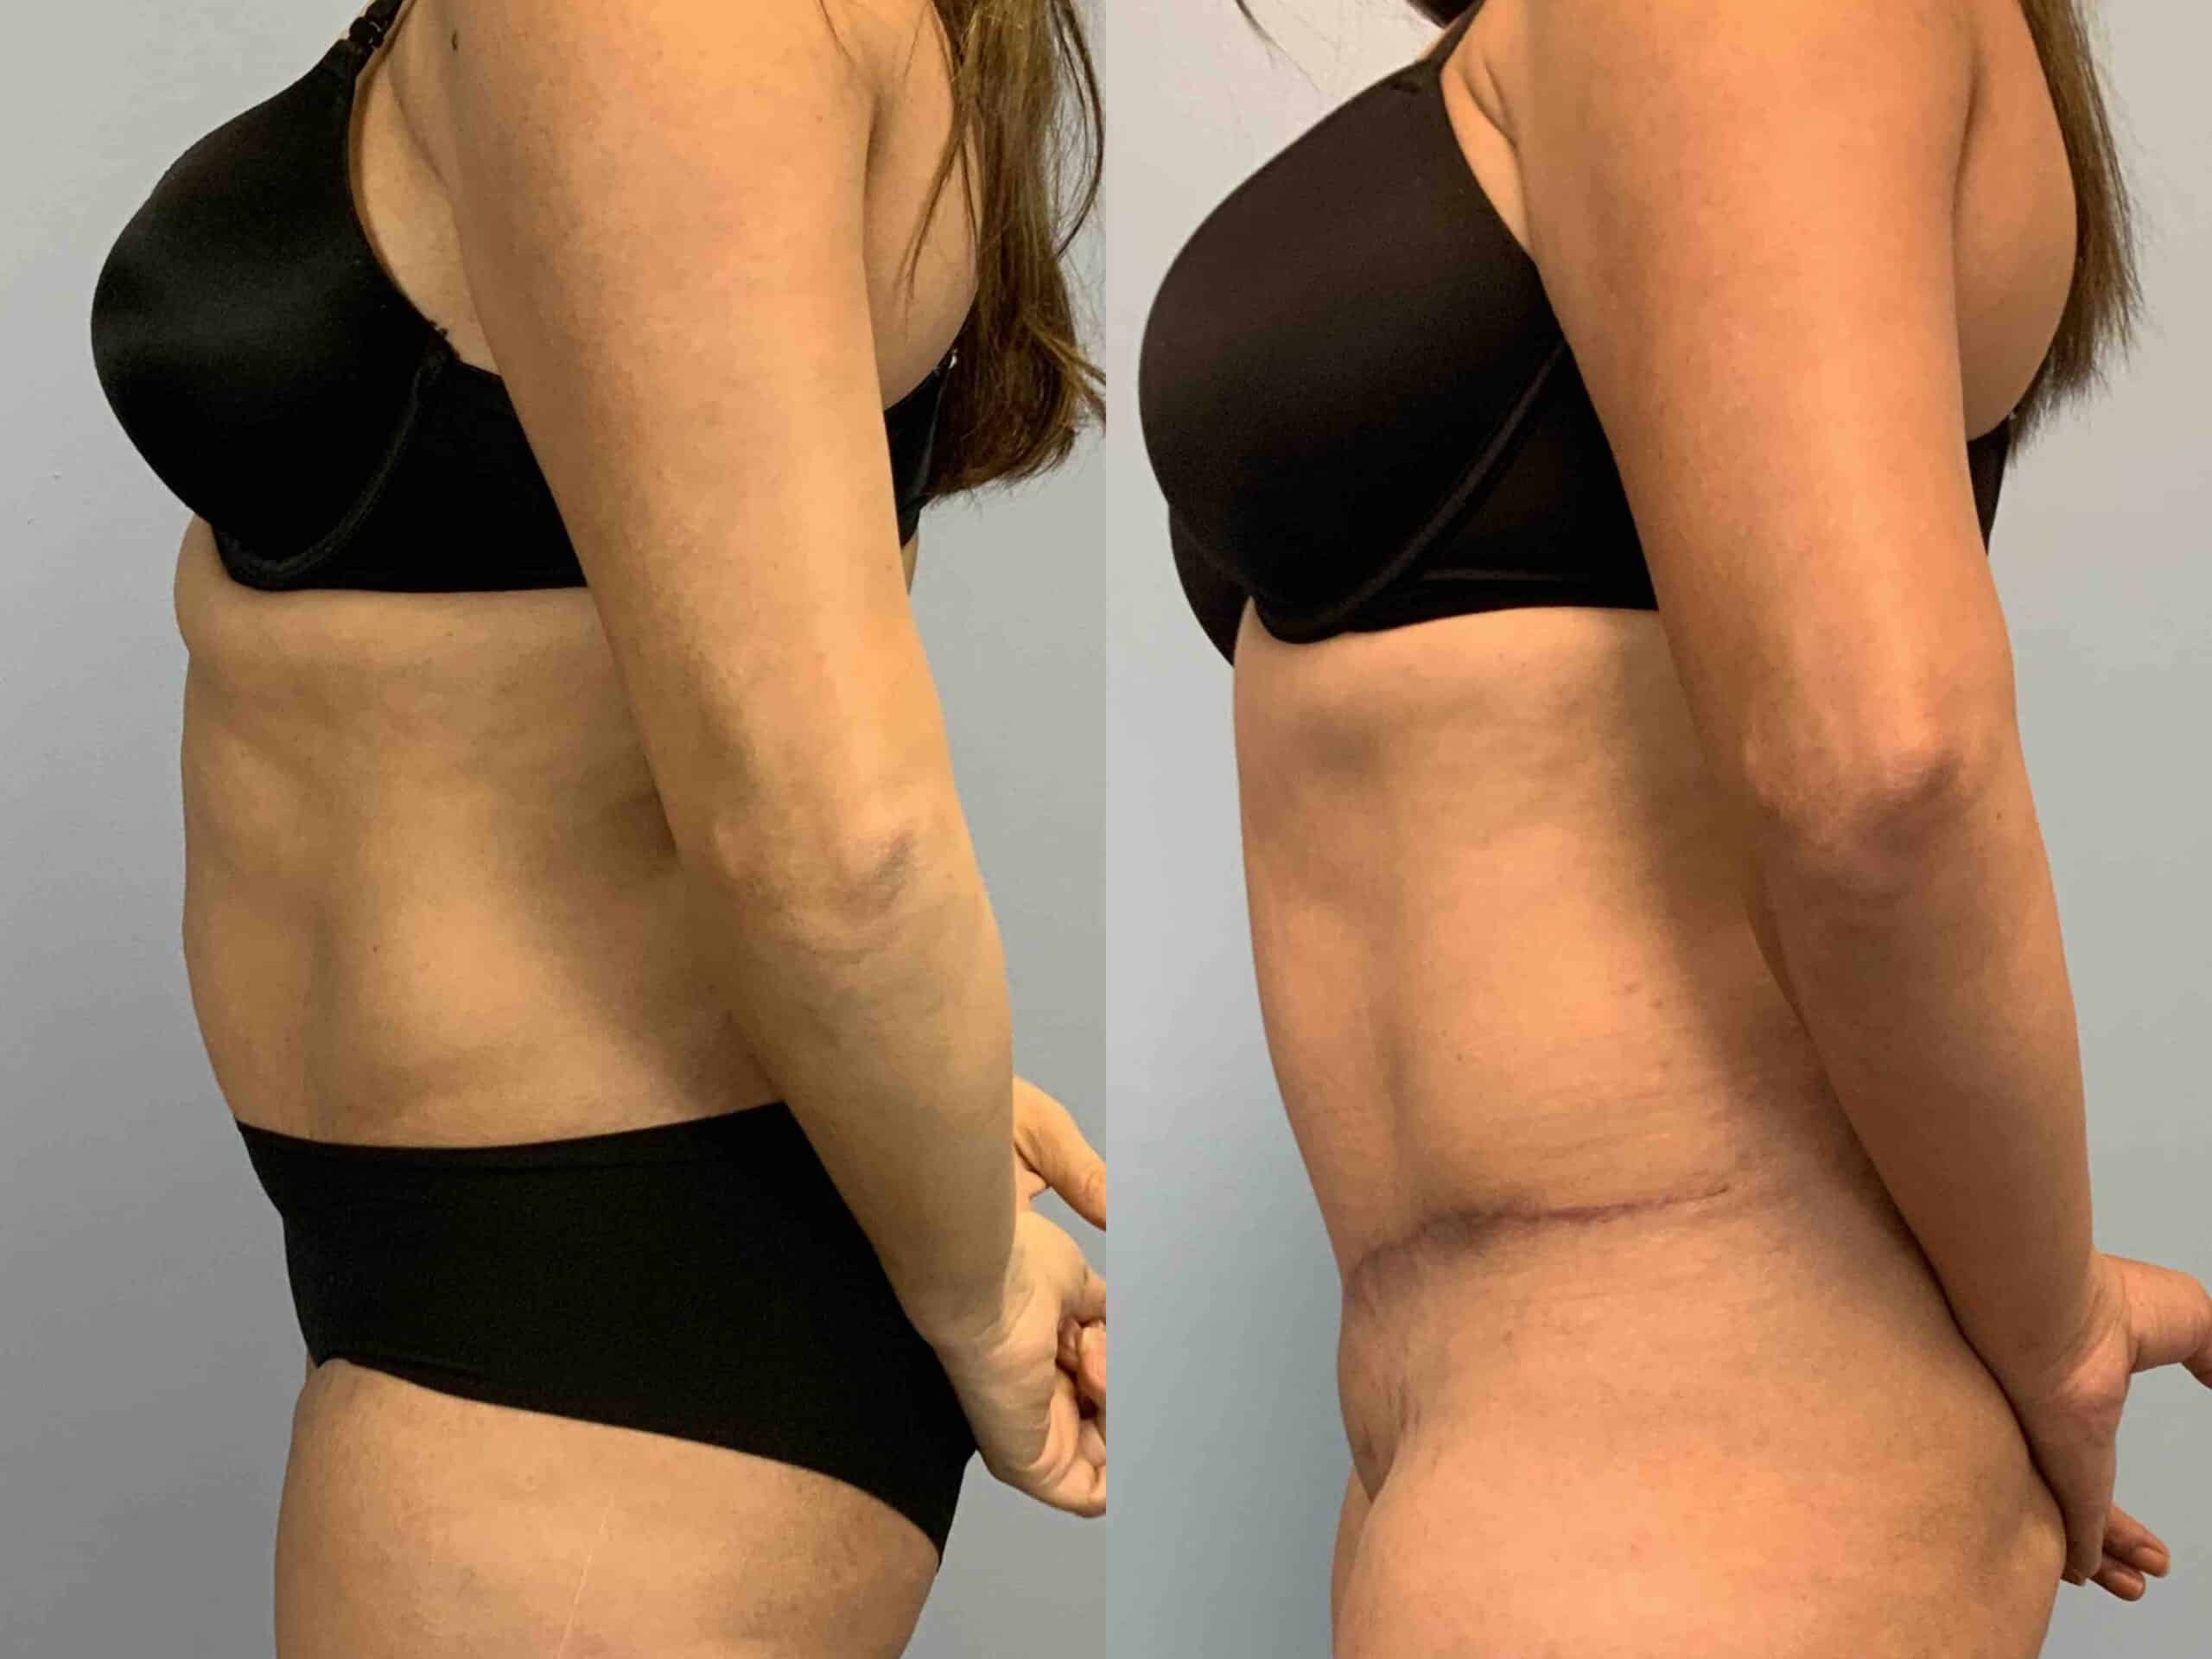 Before and after, 2 mo post op from tummy tuck performed by Dr. Paul Vanek (side view)